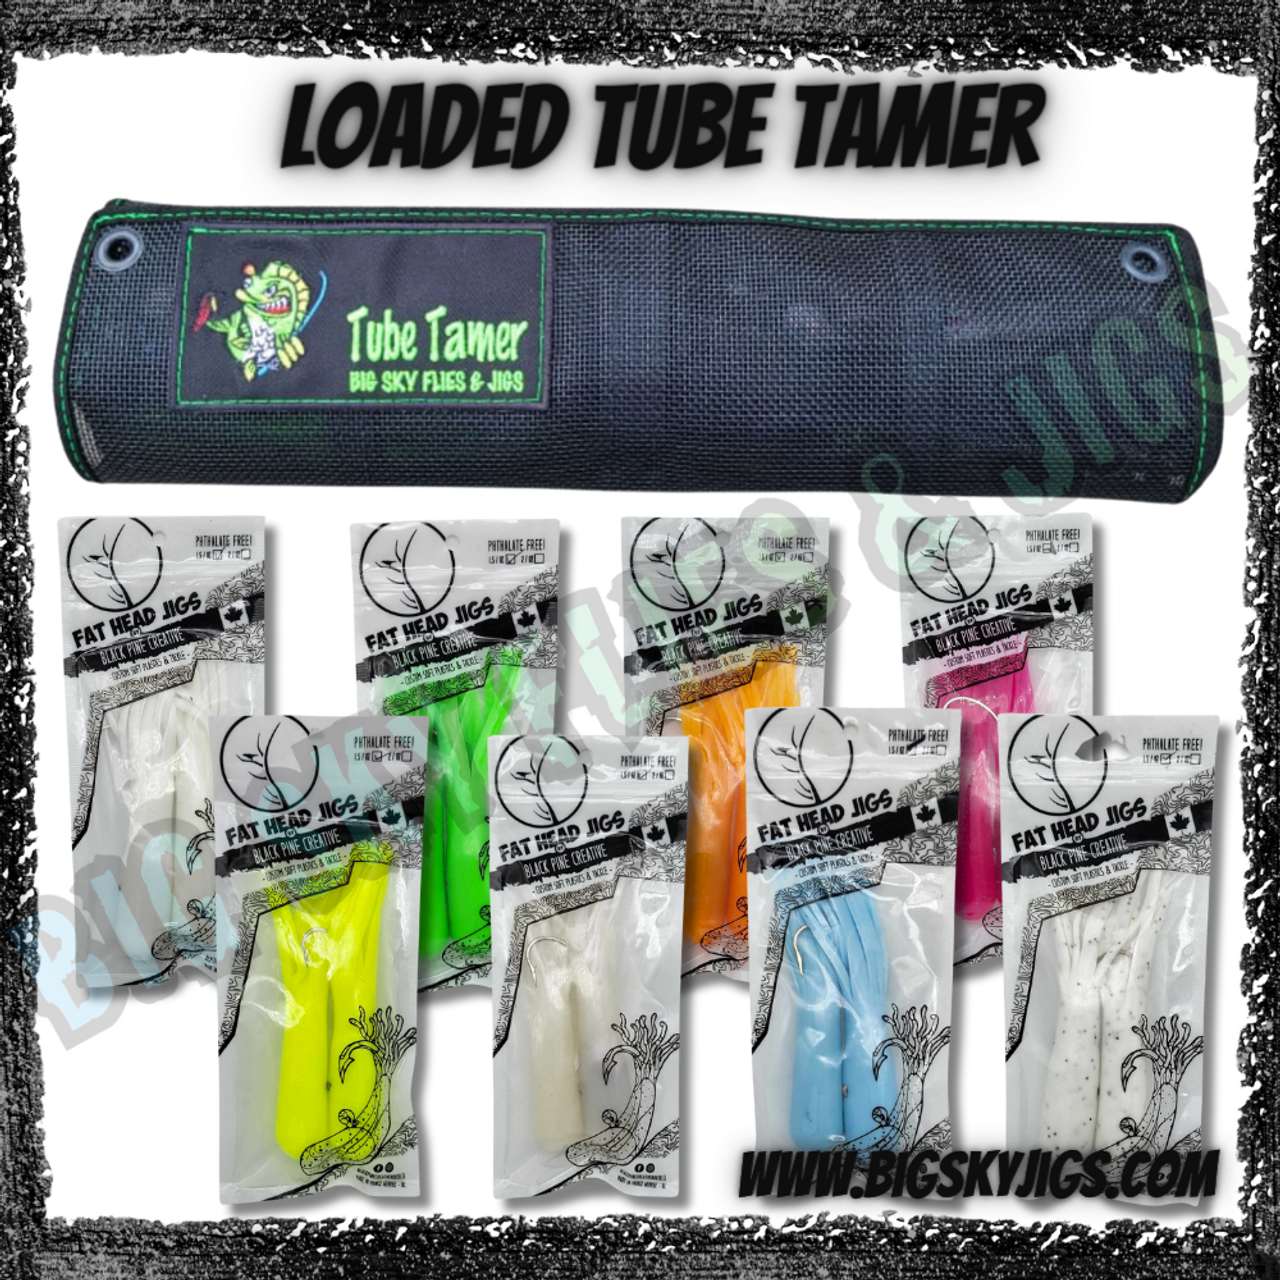 Introducing the Great North Tube Tamer Kit, the ultimate companion for anglers targeting lake trout! This comprehensive kit includes 8 packs of 2 oz Laker Trout Tubes, each pack boasting a bonus tube for added value. Crafted with precision and expertise, these tubes are specially designed in a striking Kryptonite Glow color, ensuring visibility even in low light conditions.
Constructed from durable materials, these tubes are built to withstand the rigors of lake trout fishing. Equipped with strong hooks, you can trust in their ability to secure your prized catch. Whether you're a seasoned angler or just starting out, these tubes offer reliability and performance on the water.

But that's not all – the Great North Tube Tamer Kit also includes a Tube Tamer for convenient storage of your Lake Trout Tubes. This handy accessory ensures your tubes stay organized and readily accessible, saving you time and hassle on the water.

With the Great North Tube Tamer Kit by your side, you'll be ready to tackle any lake trout fishing expedition with confidence. Cast out, reel in, and experience the thrill of landing your next trophy catch!